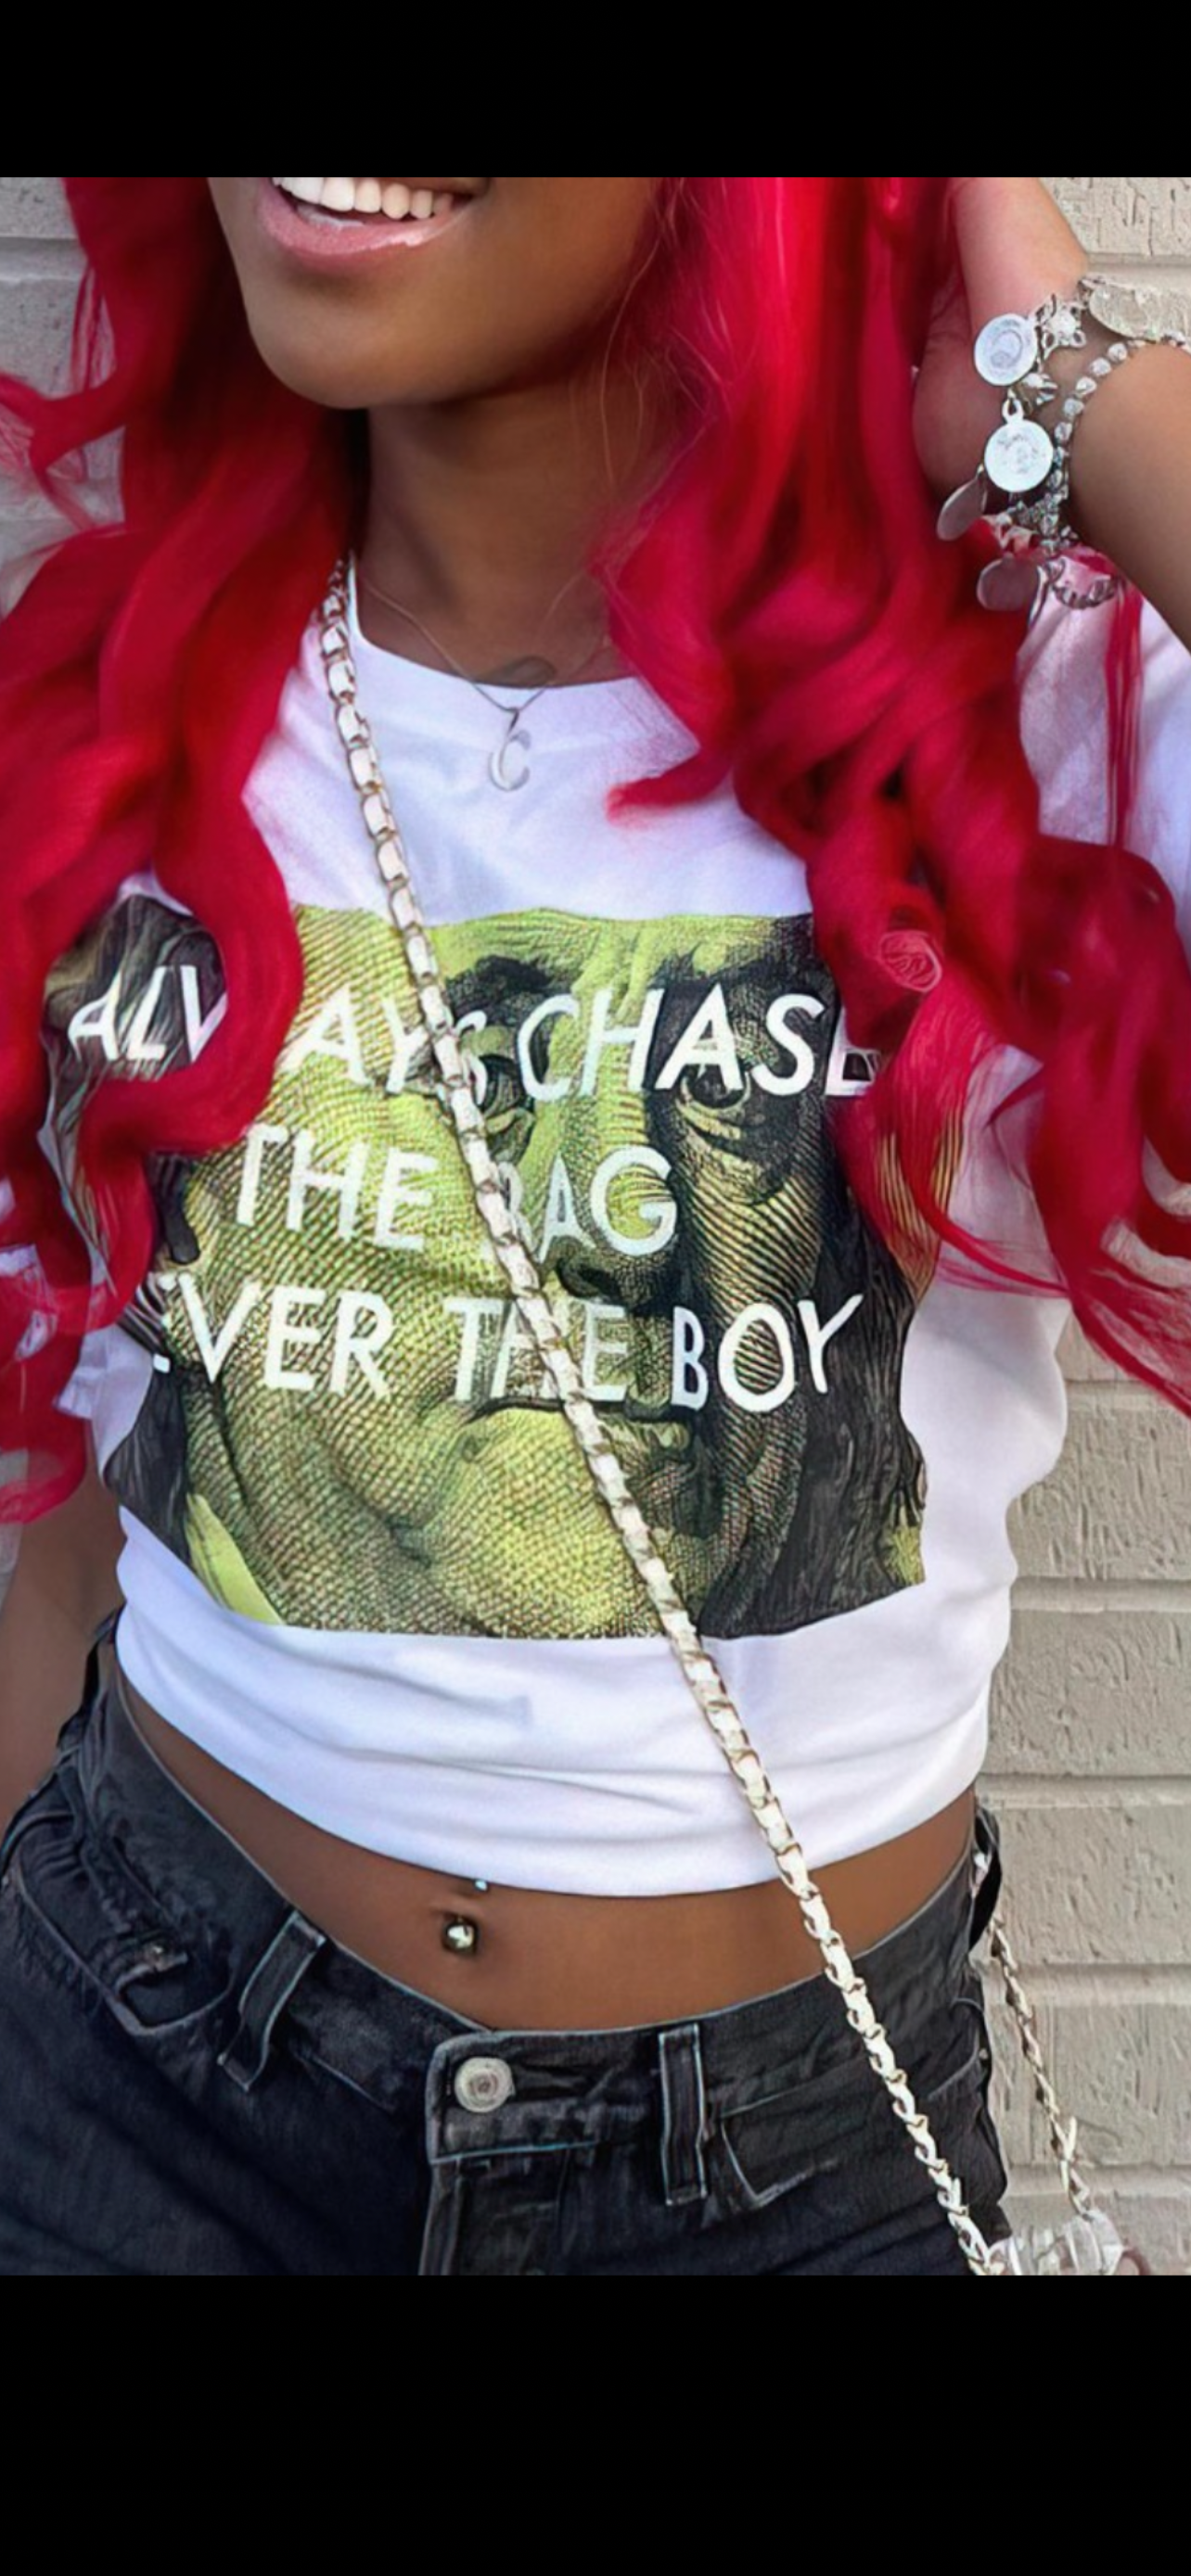 Chase The Bag Never The Boy Tee